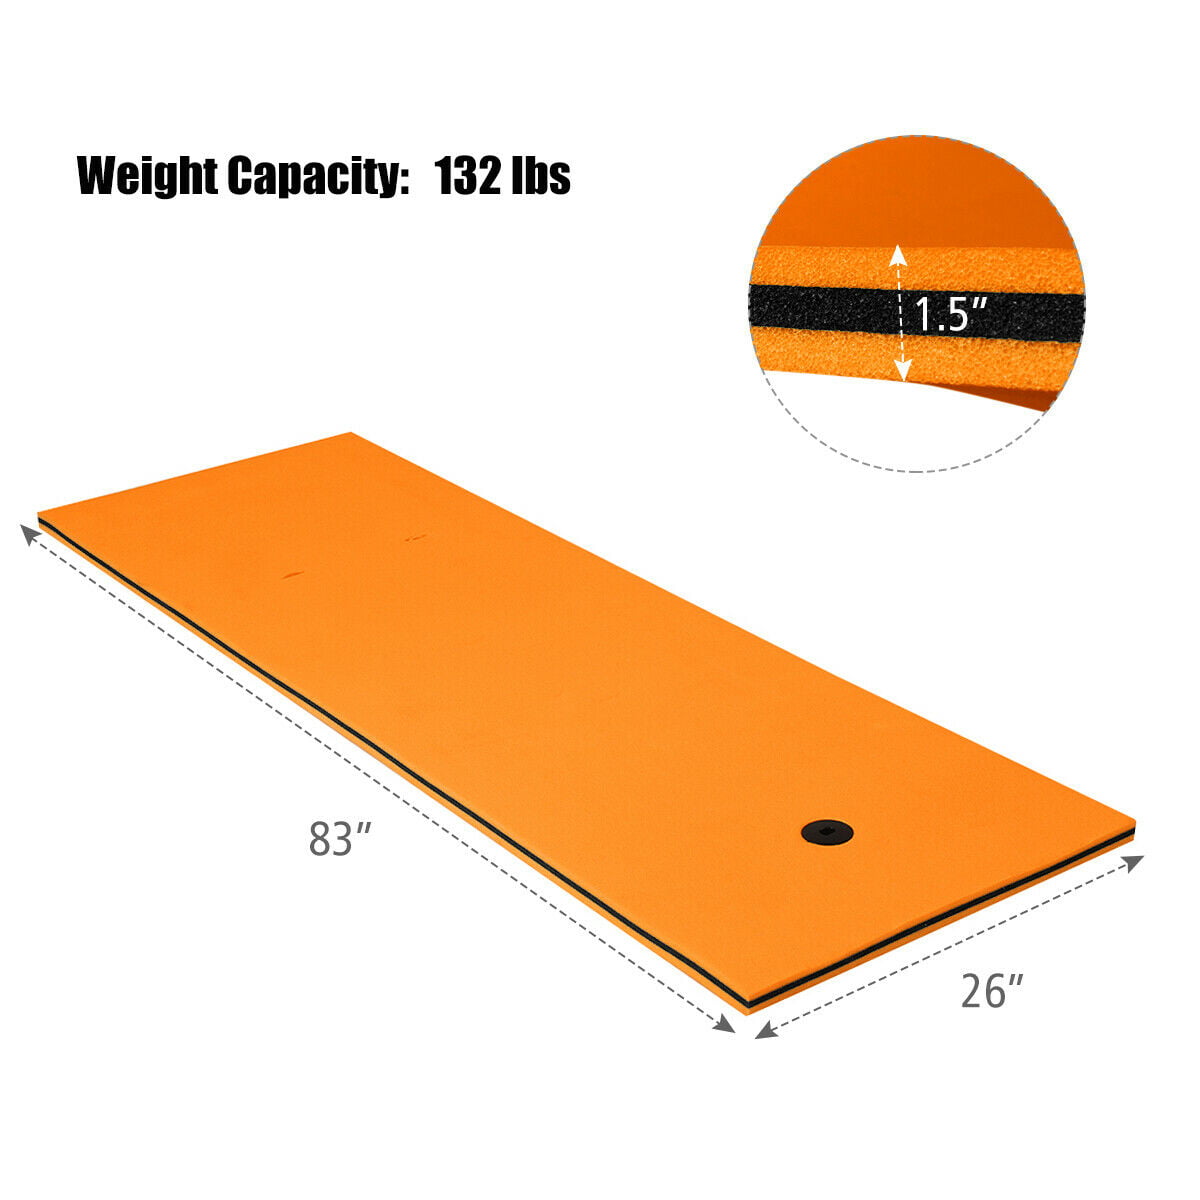 83'' x 26'' 3-layer Floating Pad Mat Water Sports Recreation Relaxing Orange 